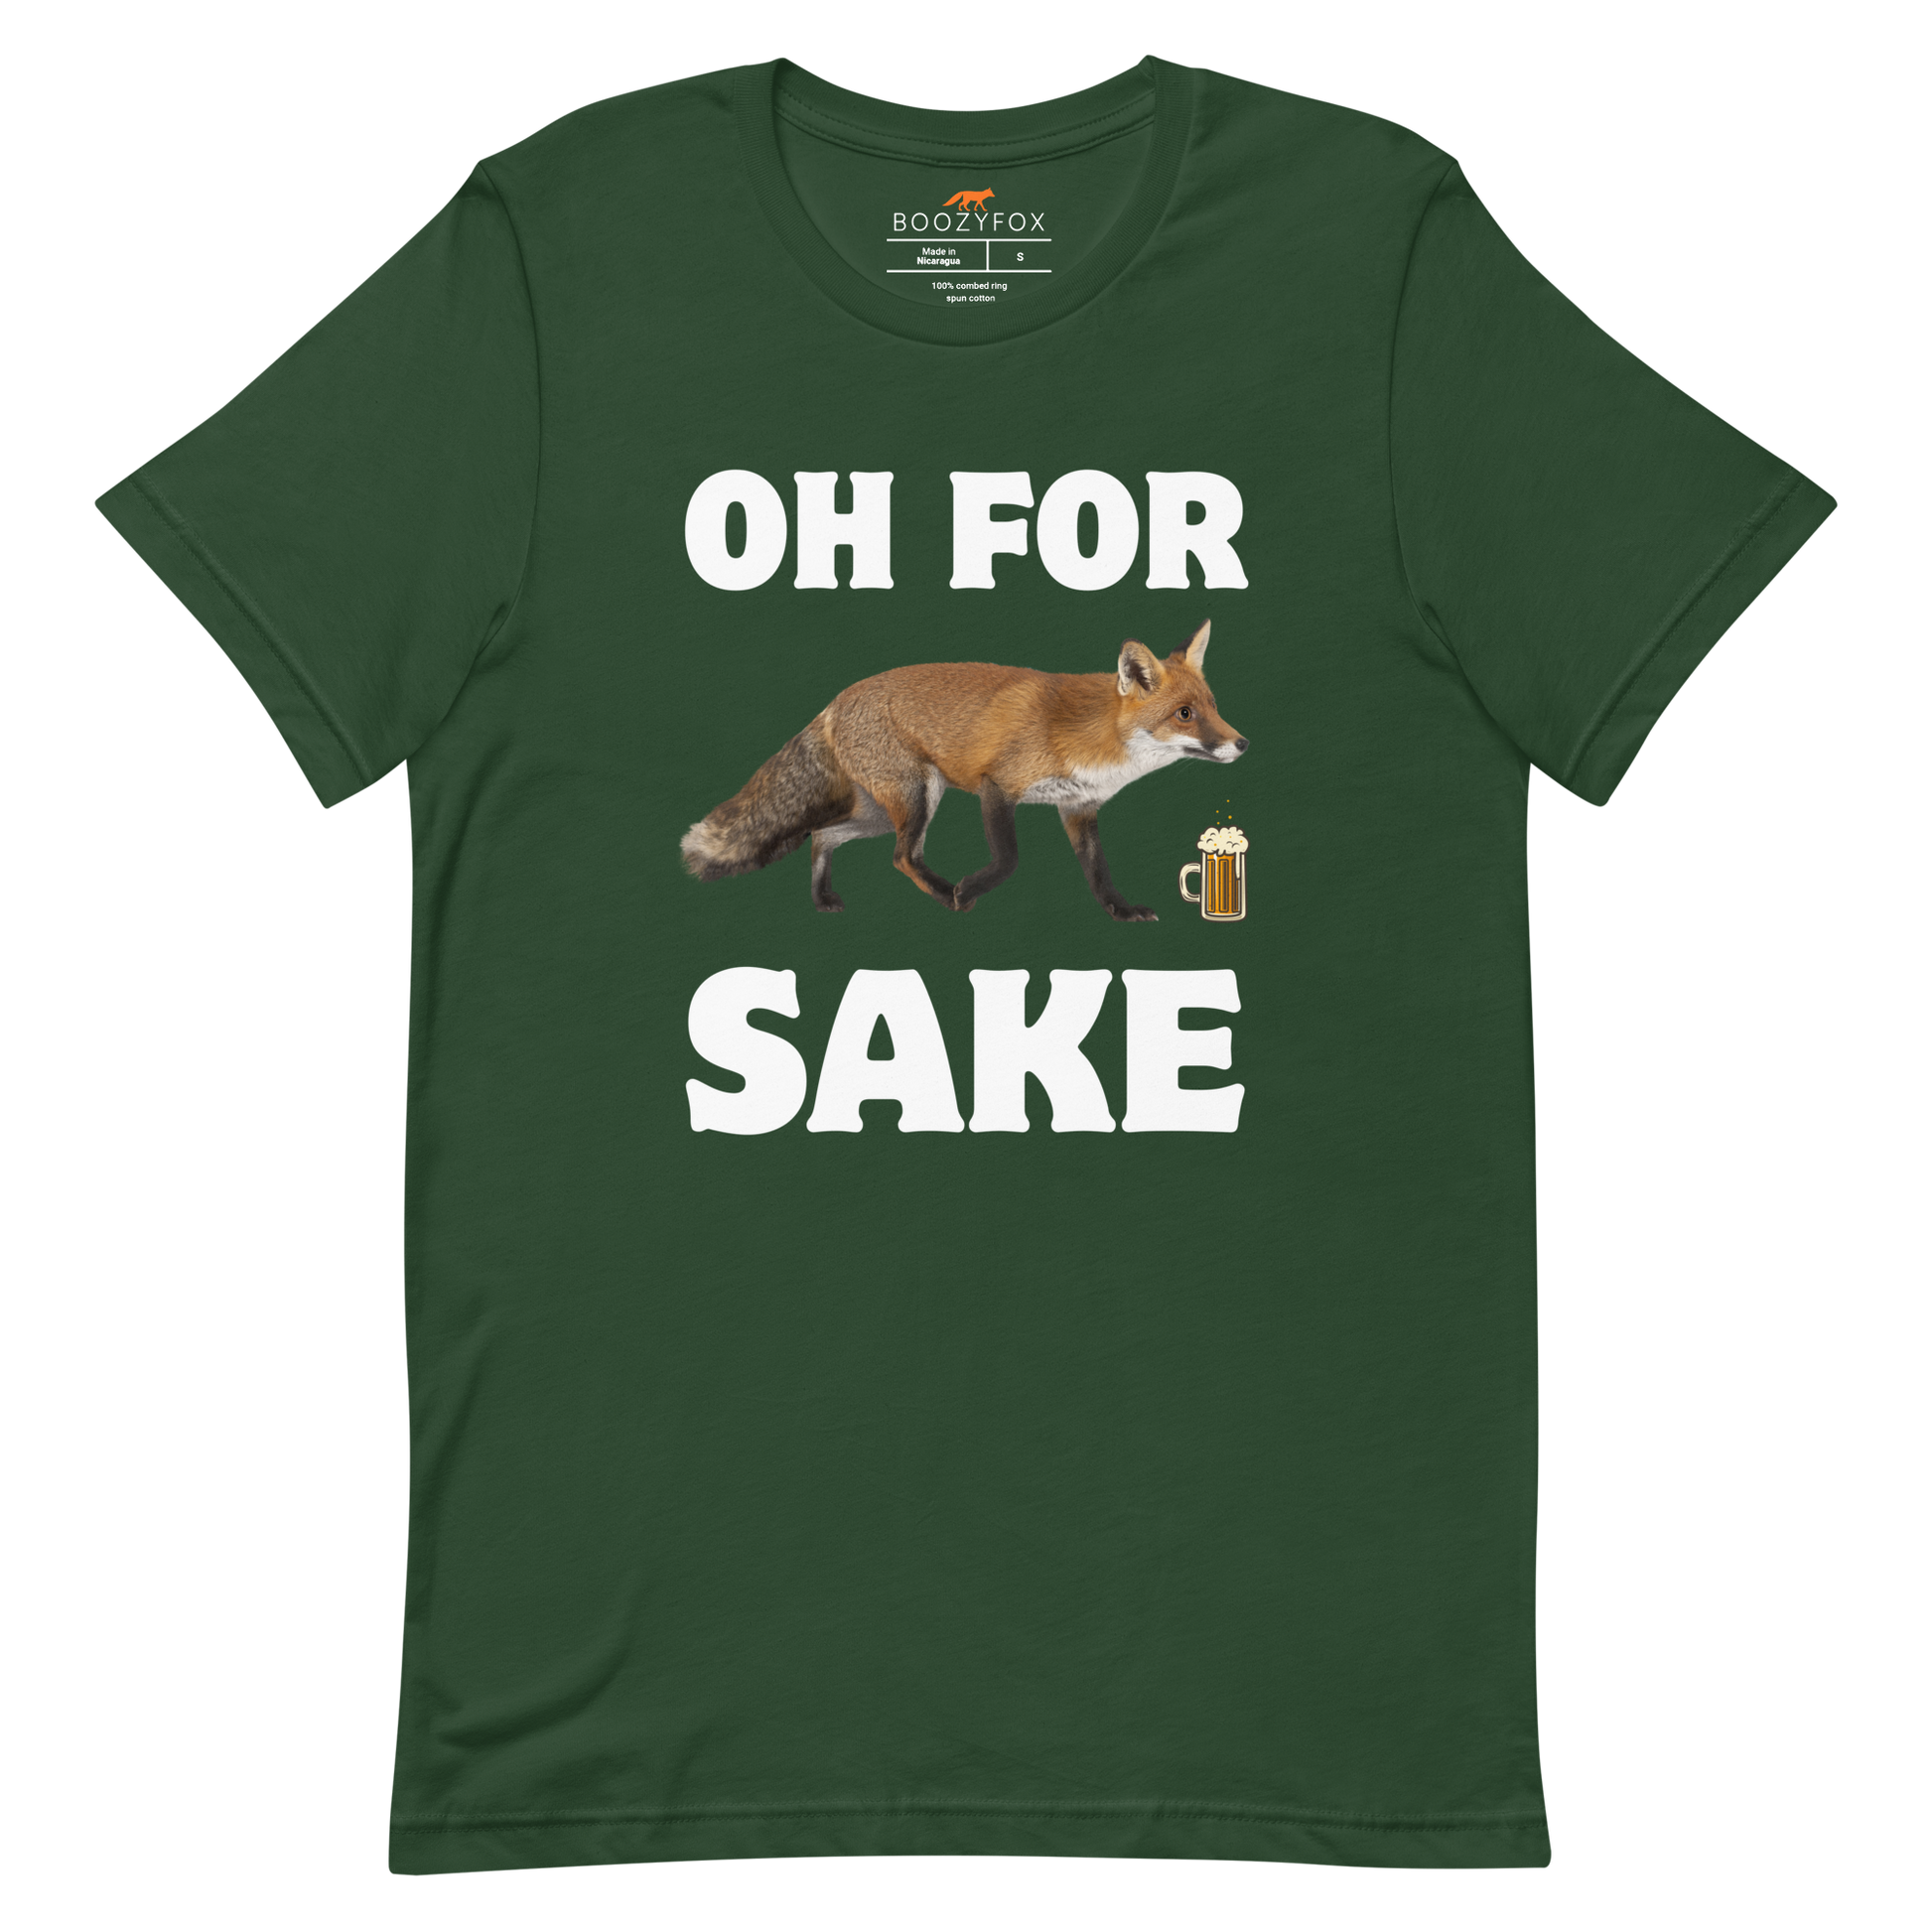 Forest Green Premium Fox T-Shirt featuring a Oh For Fox Sake graphic on the chest - Funny Graphic Fox Tees - Boozy Fox